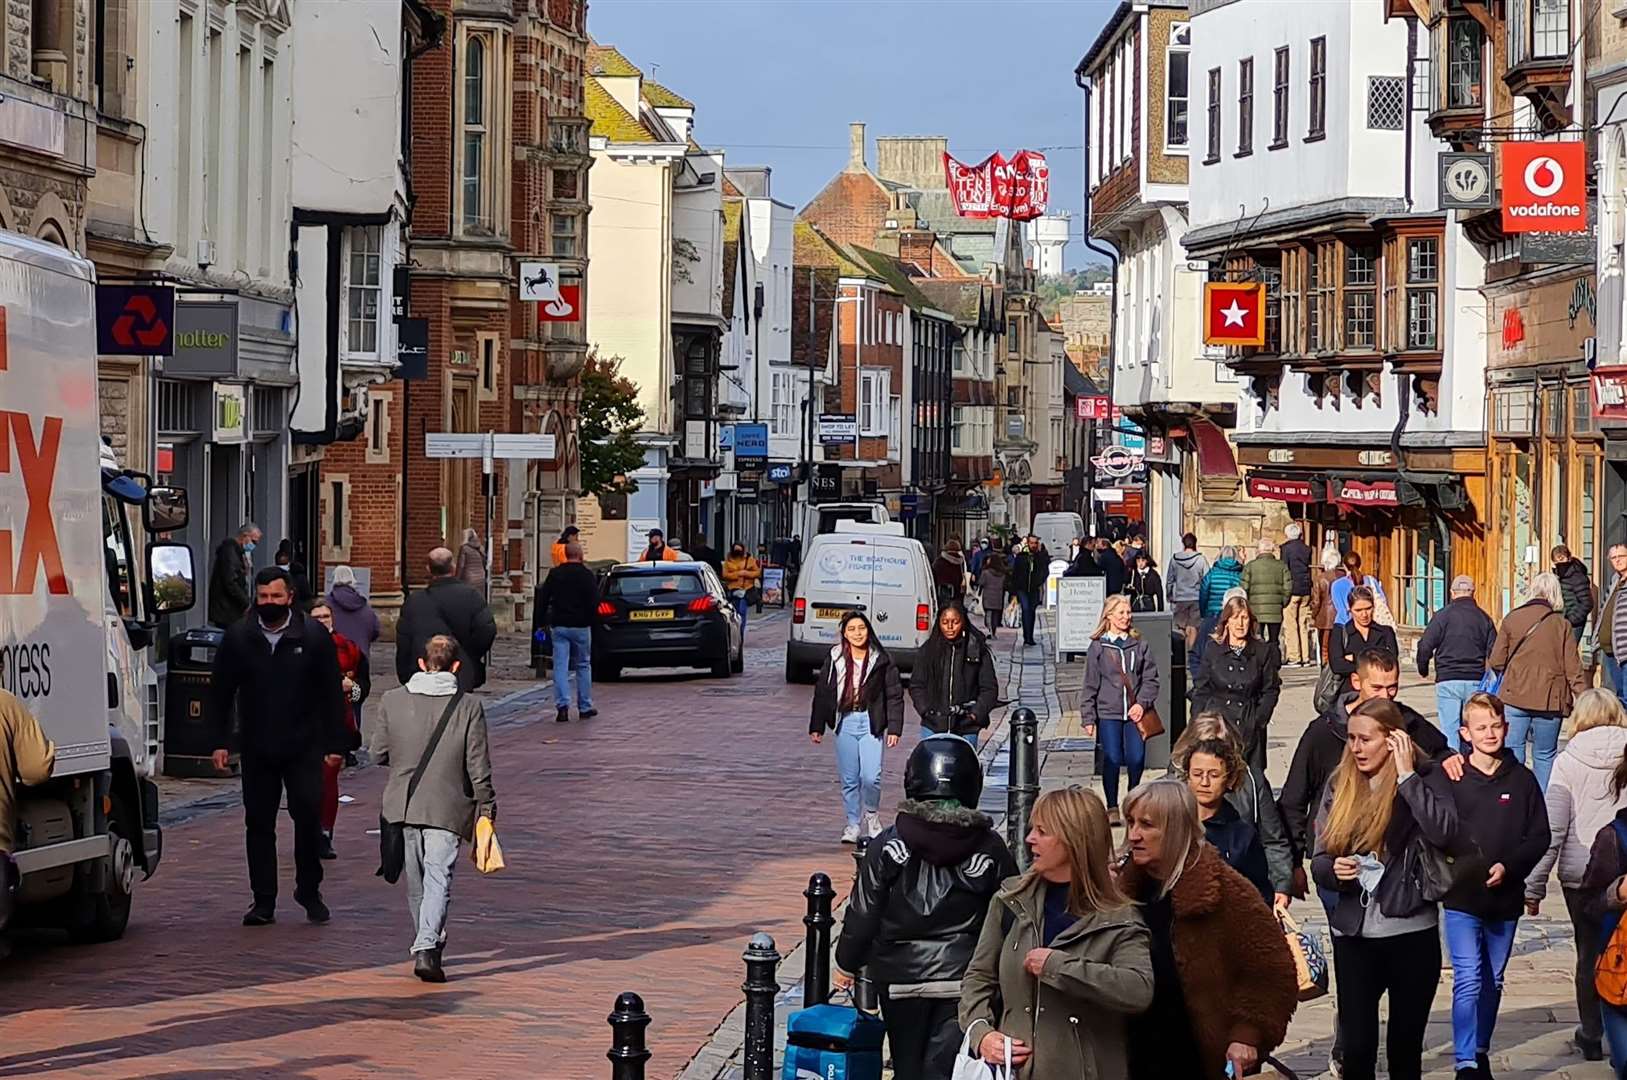 Canterbury has been ranked one of the UK's least affordable cities following a study by Halifax